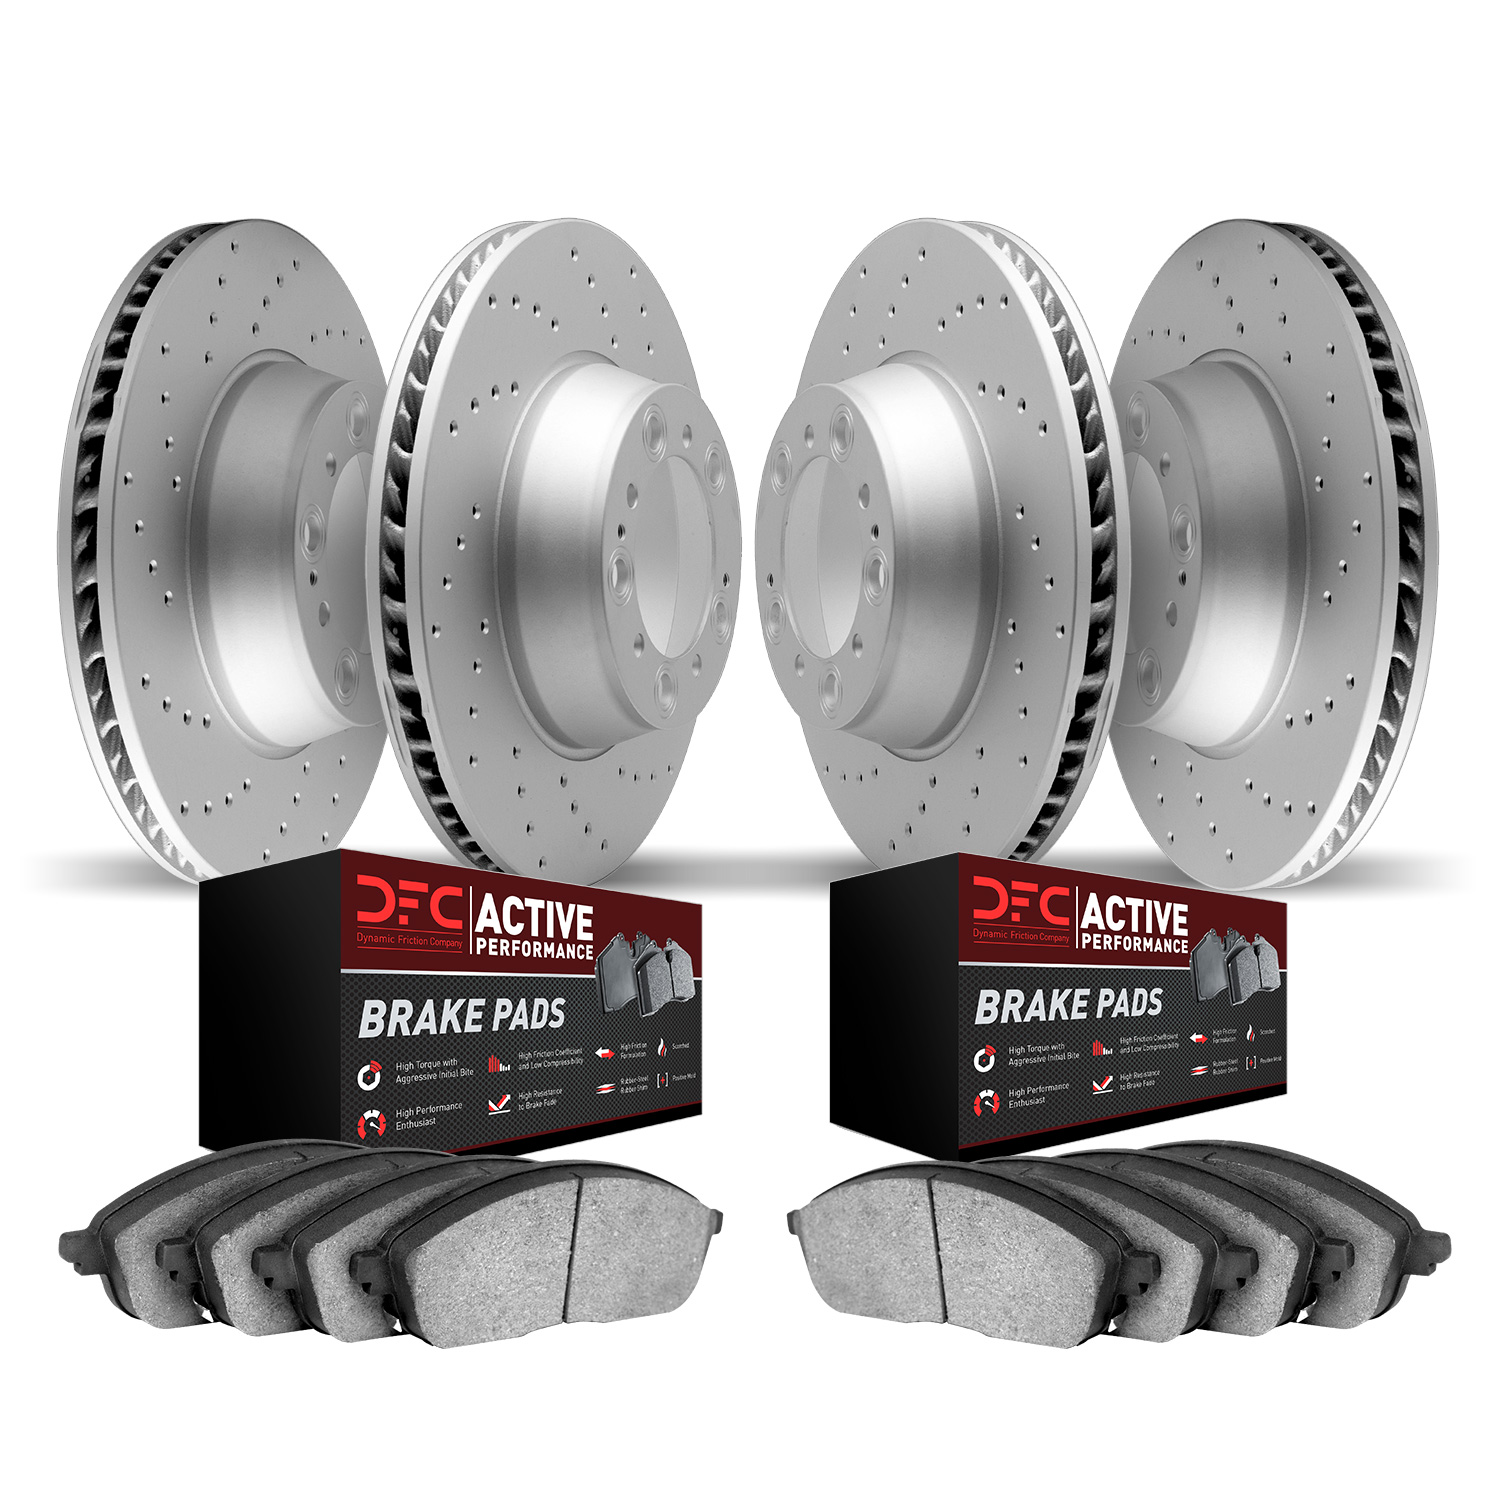 2704-67034 Geoperformance Drilled Brake Rotors with Active Performance Pads Kit, 2011-2019 Infiniti/Nissan, Position: Front and